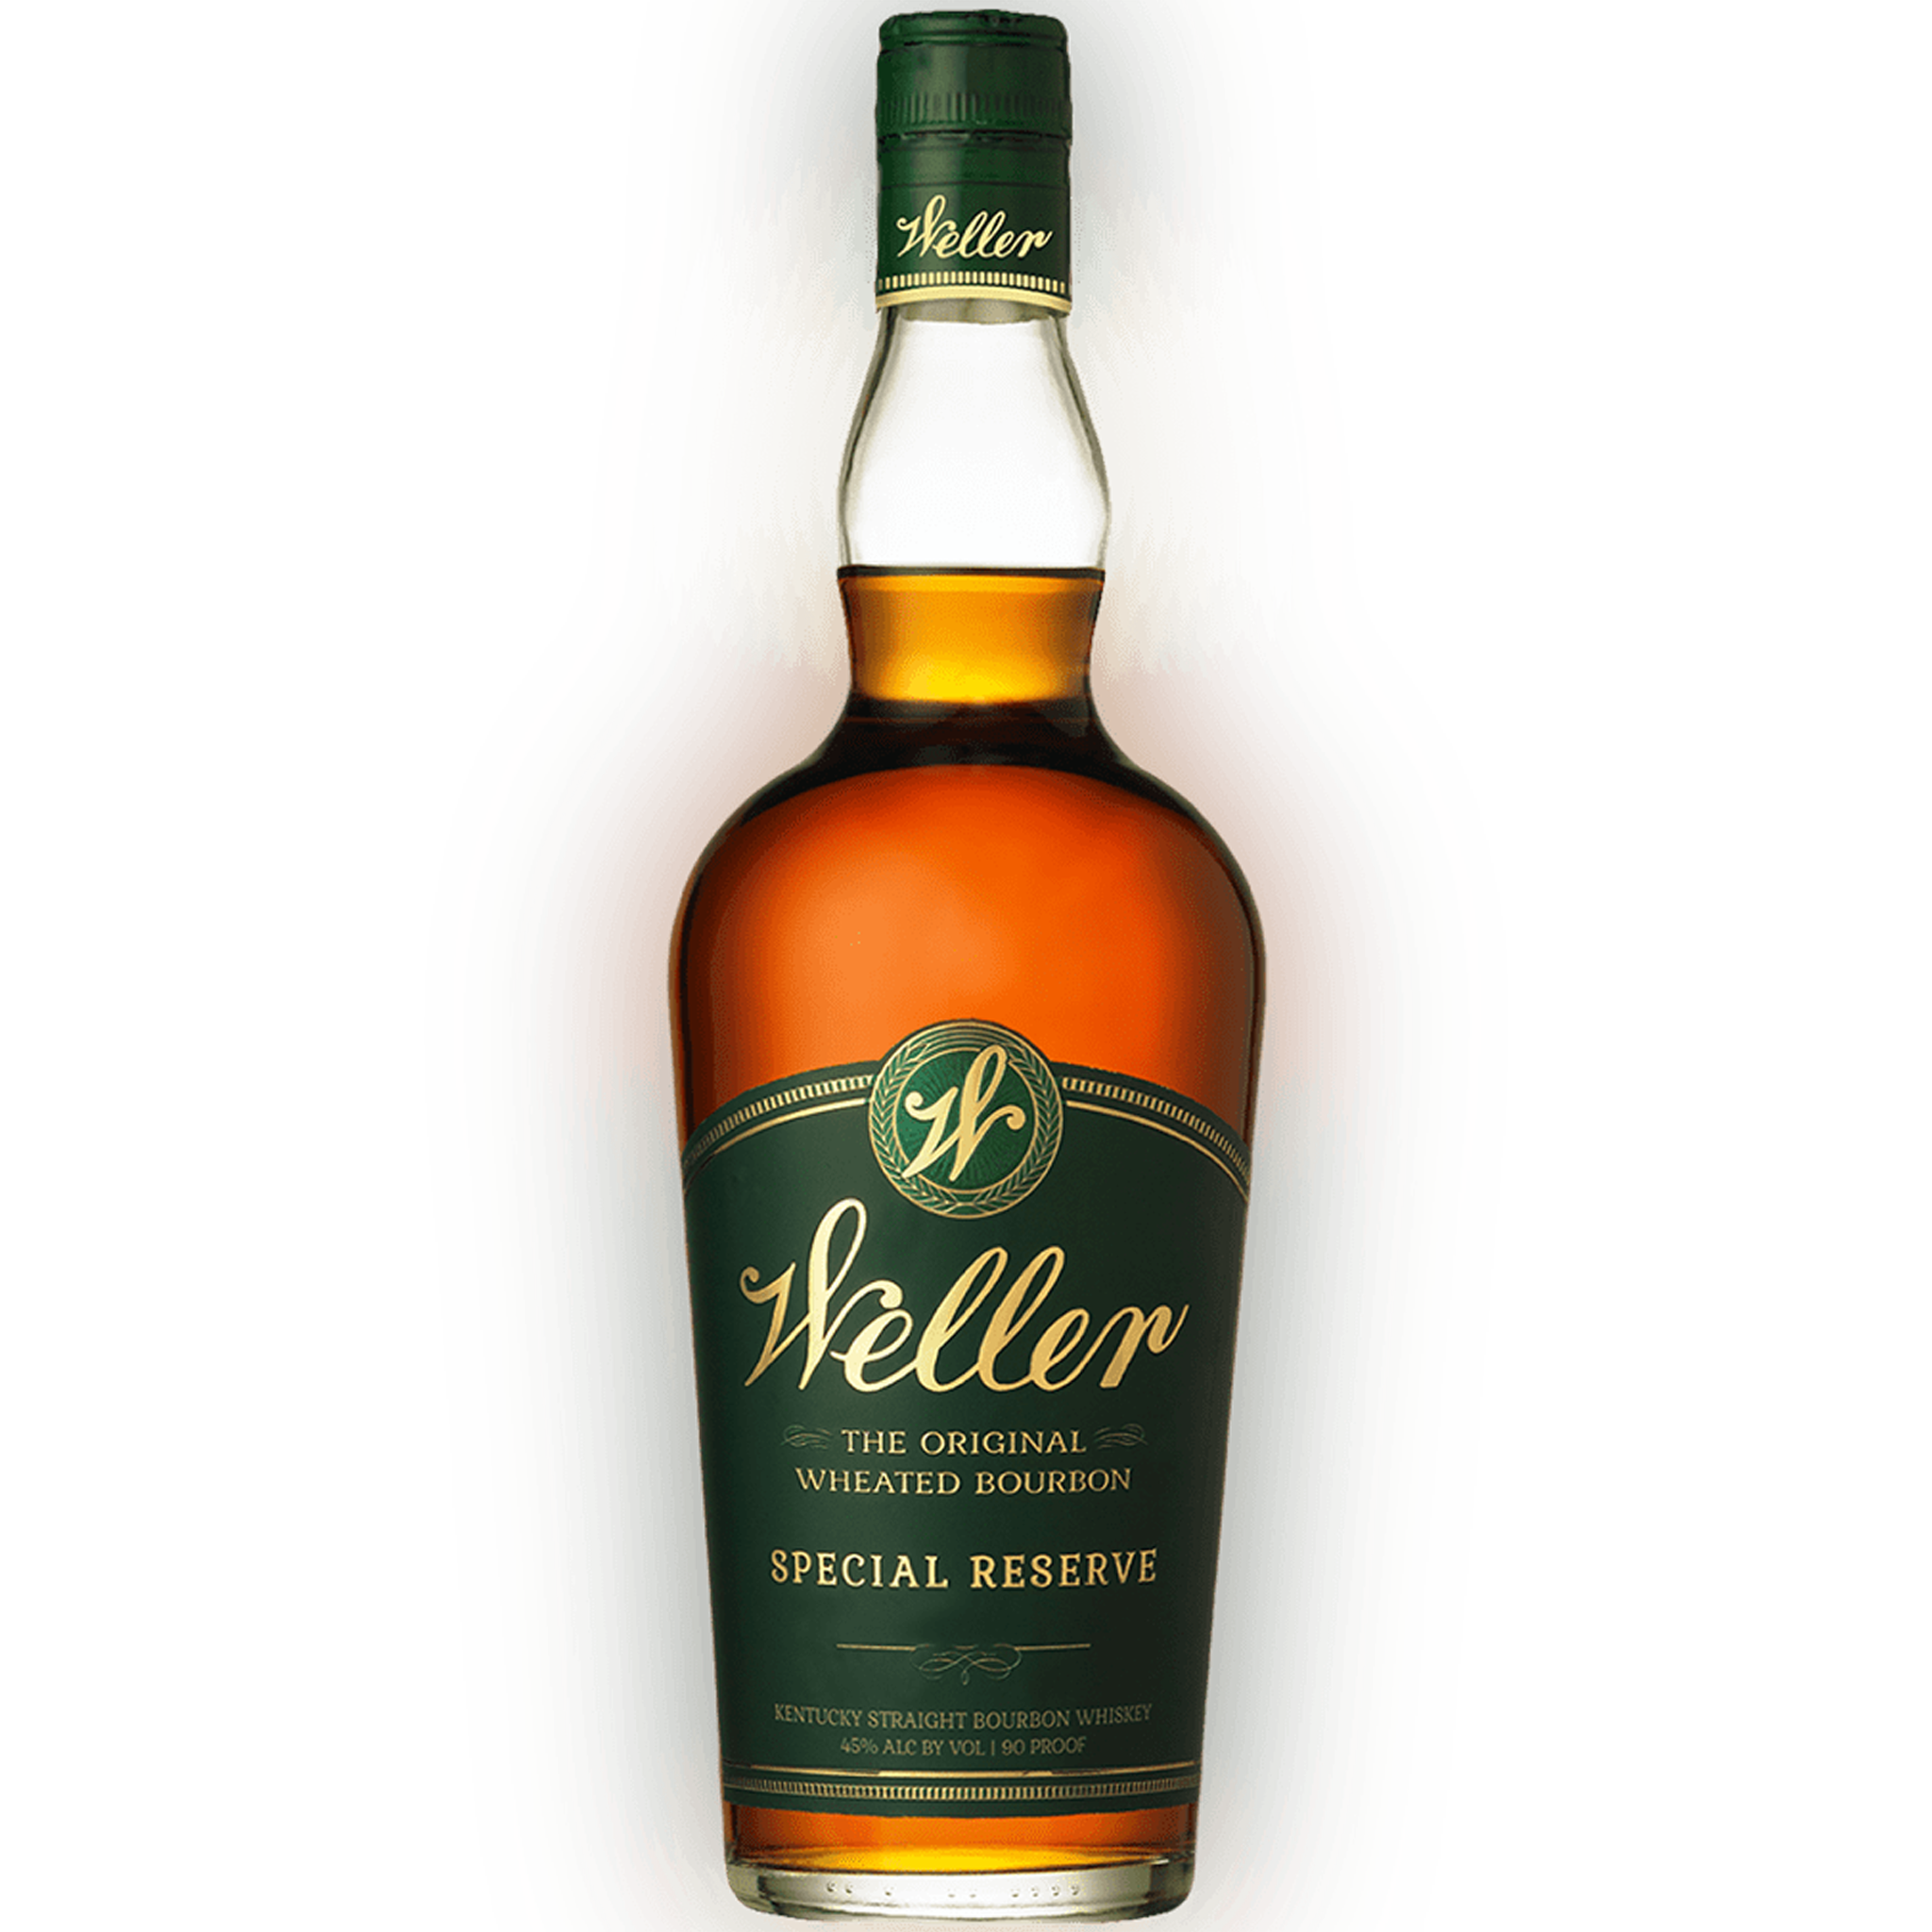 Weller Special Reserve The Original Wheated Bourbon